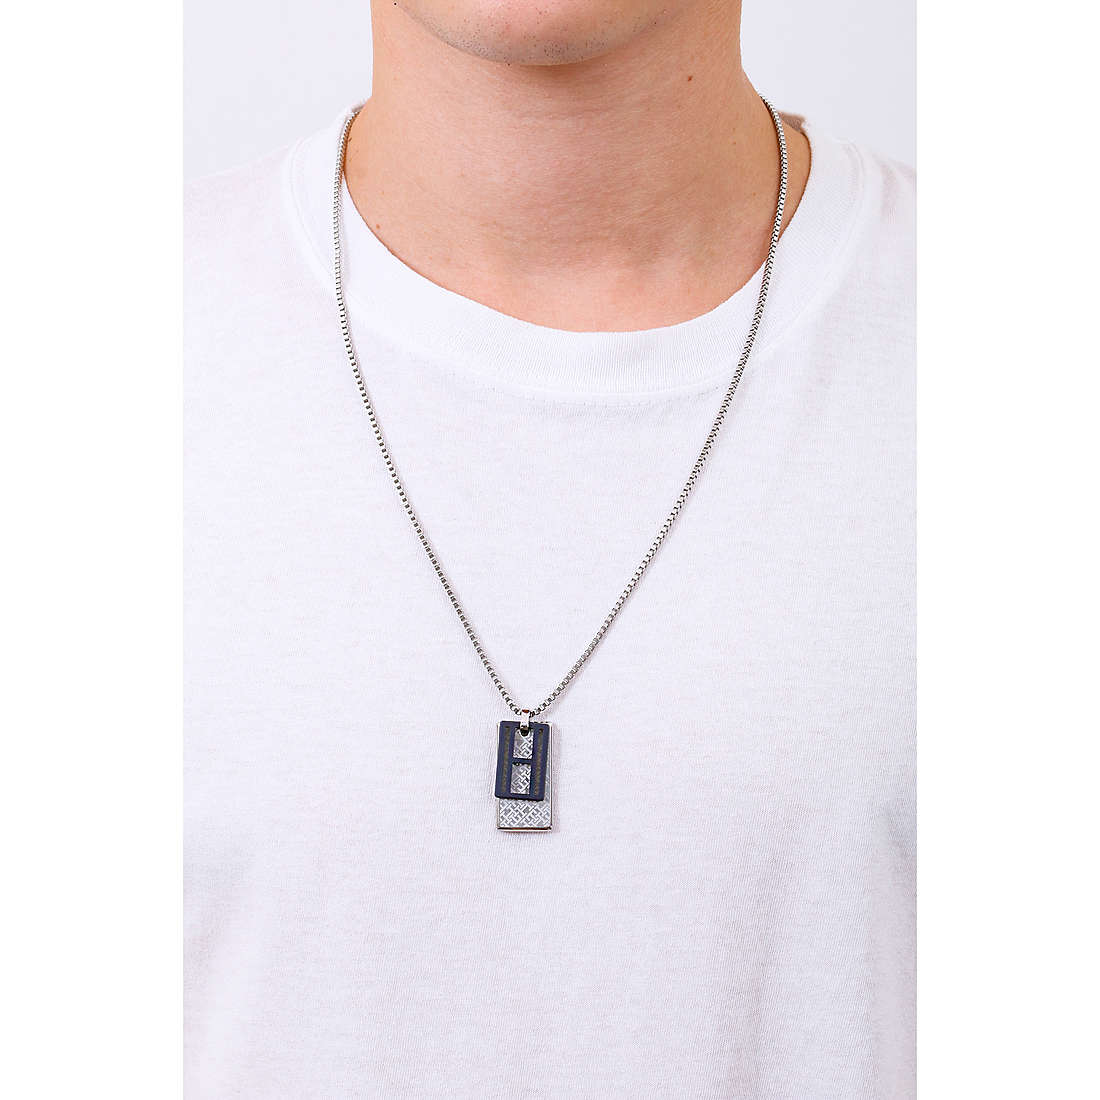 Tommy Hilfiger necklaces Anthony Ramos Capsule man 2790449 wearing